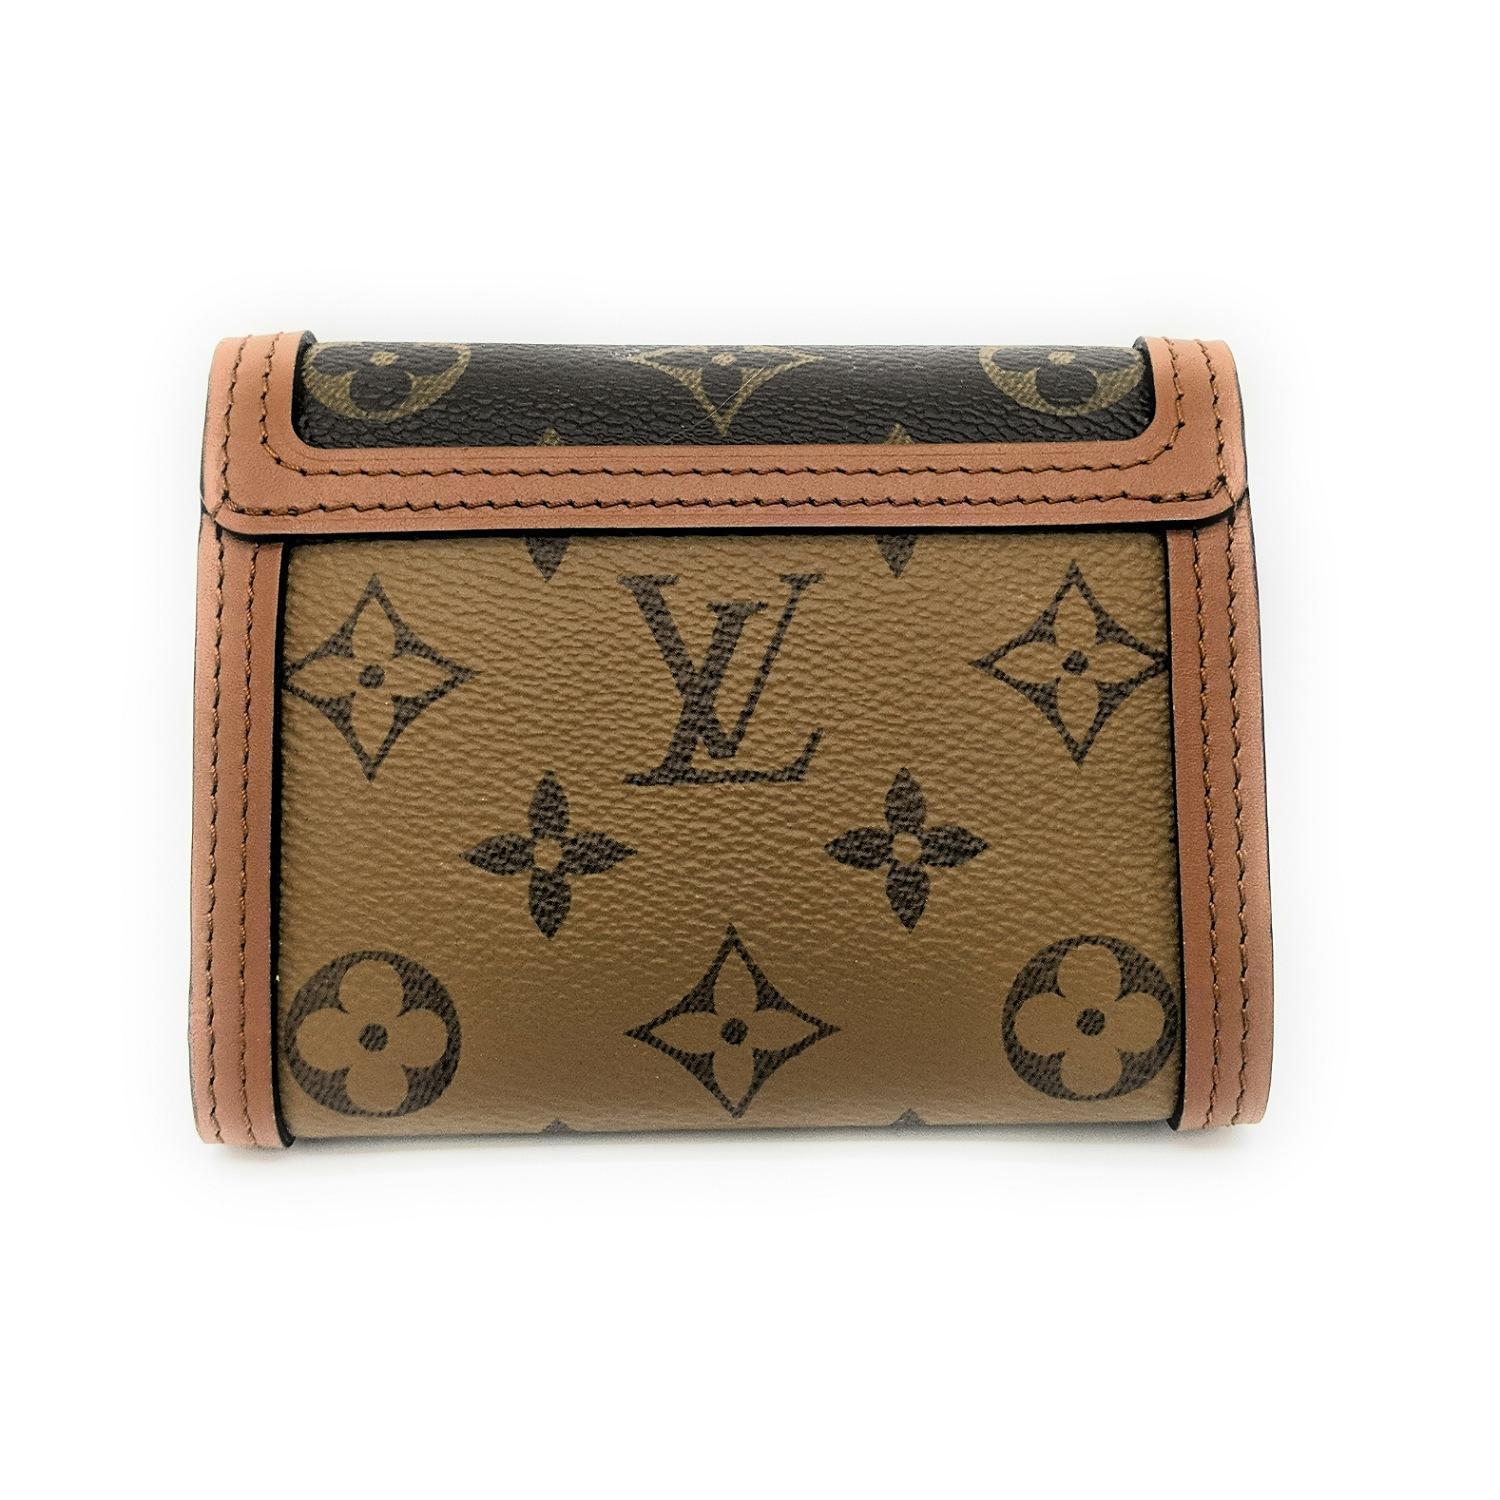 The Dauphine compact wallet takes its style cues from the emblematic Dauphine handbag. Its finely crafted design combines Monogram and Monogram Reverse canvas with calfskin trim, while it is secured by a magnetic Dauphine-signature clasp. This